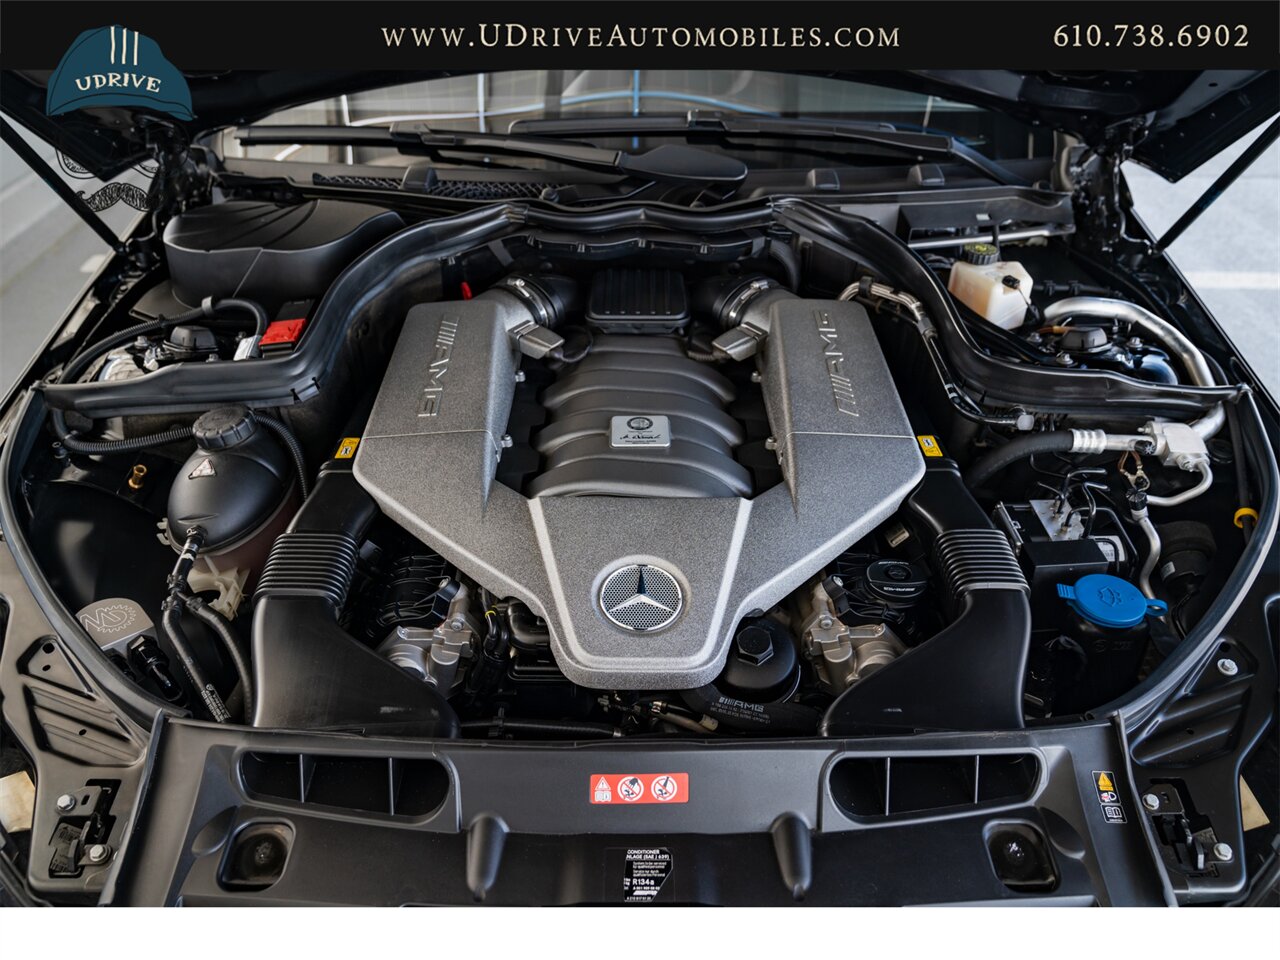 2015 Mercedes-Benz C63 AMG  Edition 507 17k Miles Pano Sunroof Locking Diff 507hp - Photo 52 - West Chester, PA 19382